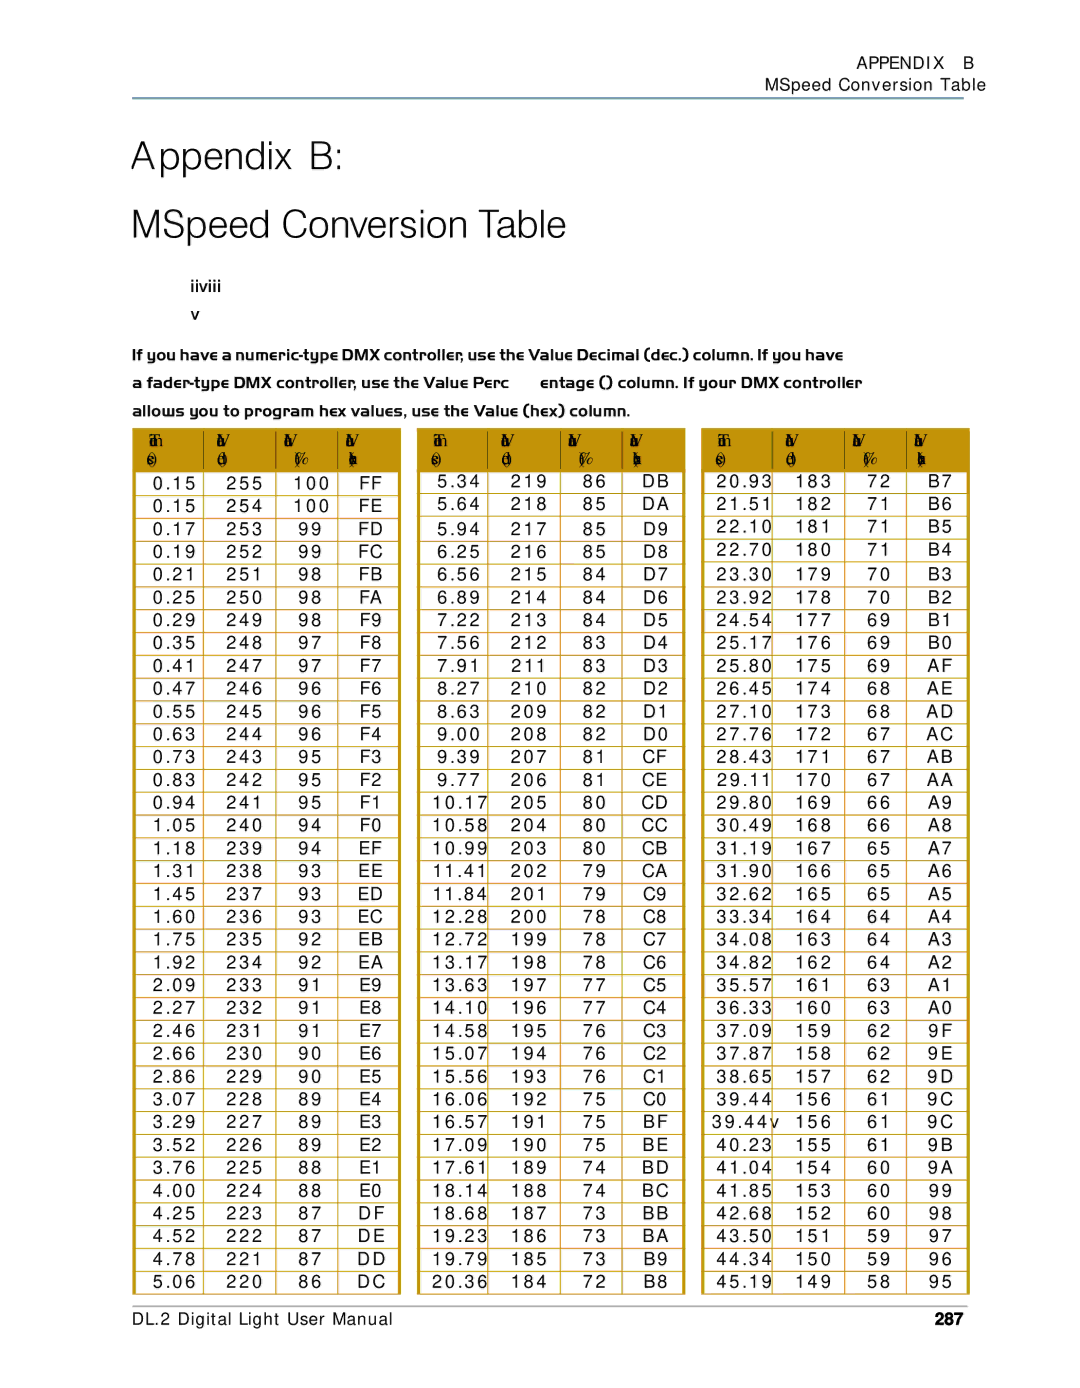 High End Systems DL.2 user manual Appendix B MSpeed Conversion Table, Time Value, Sec Dec, 287 